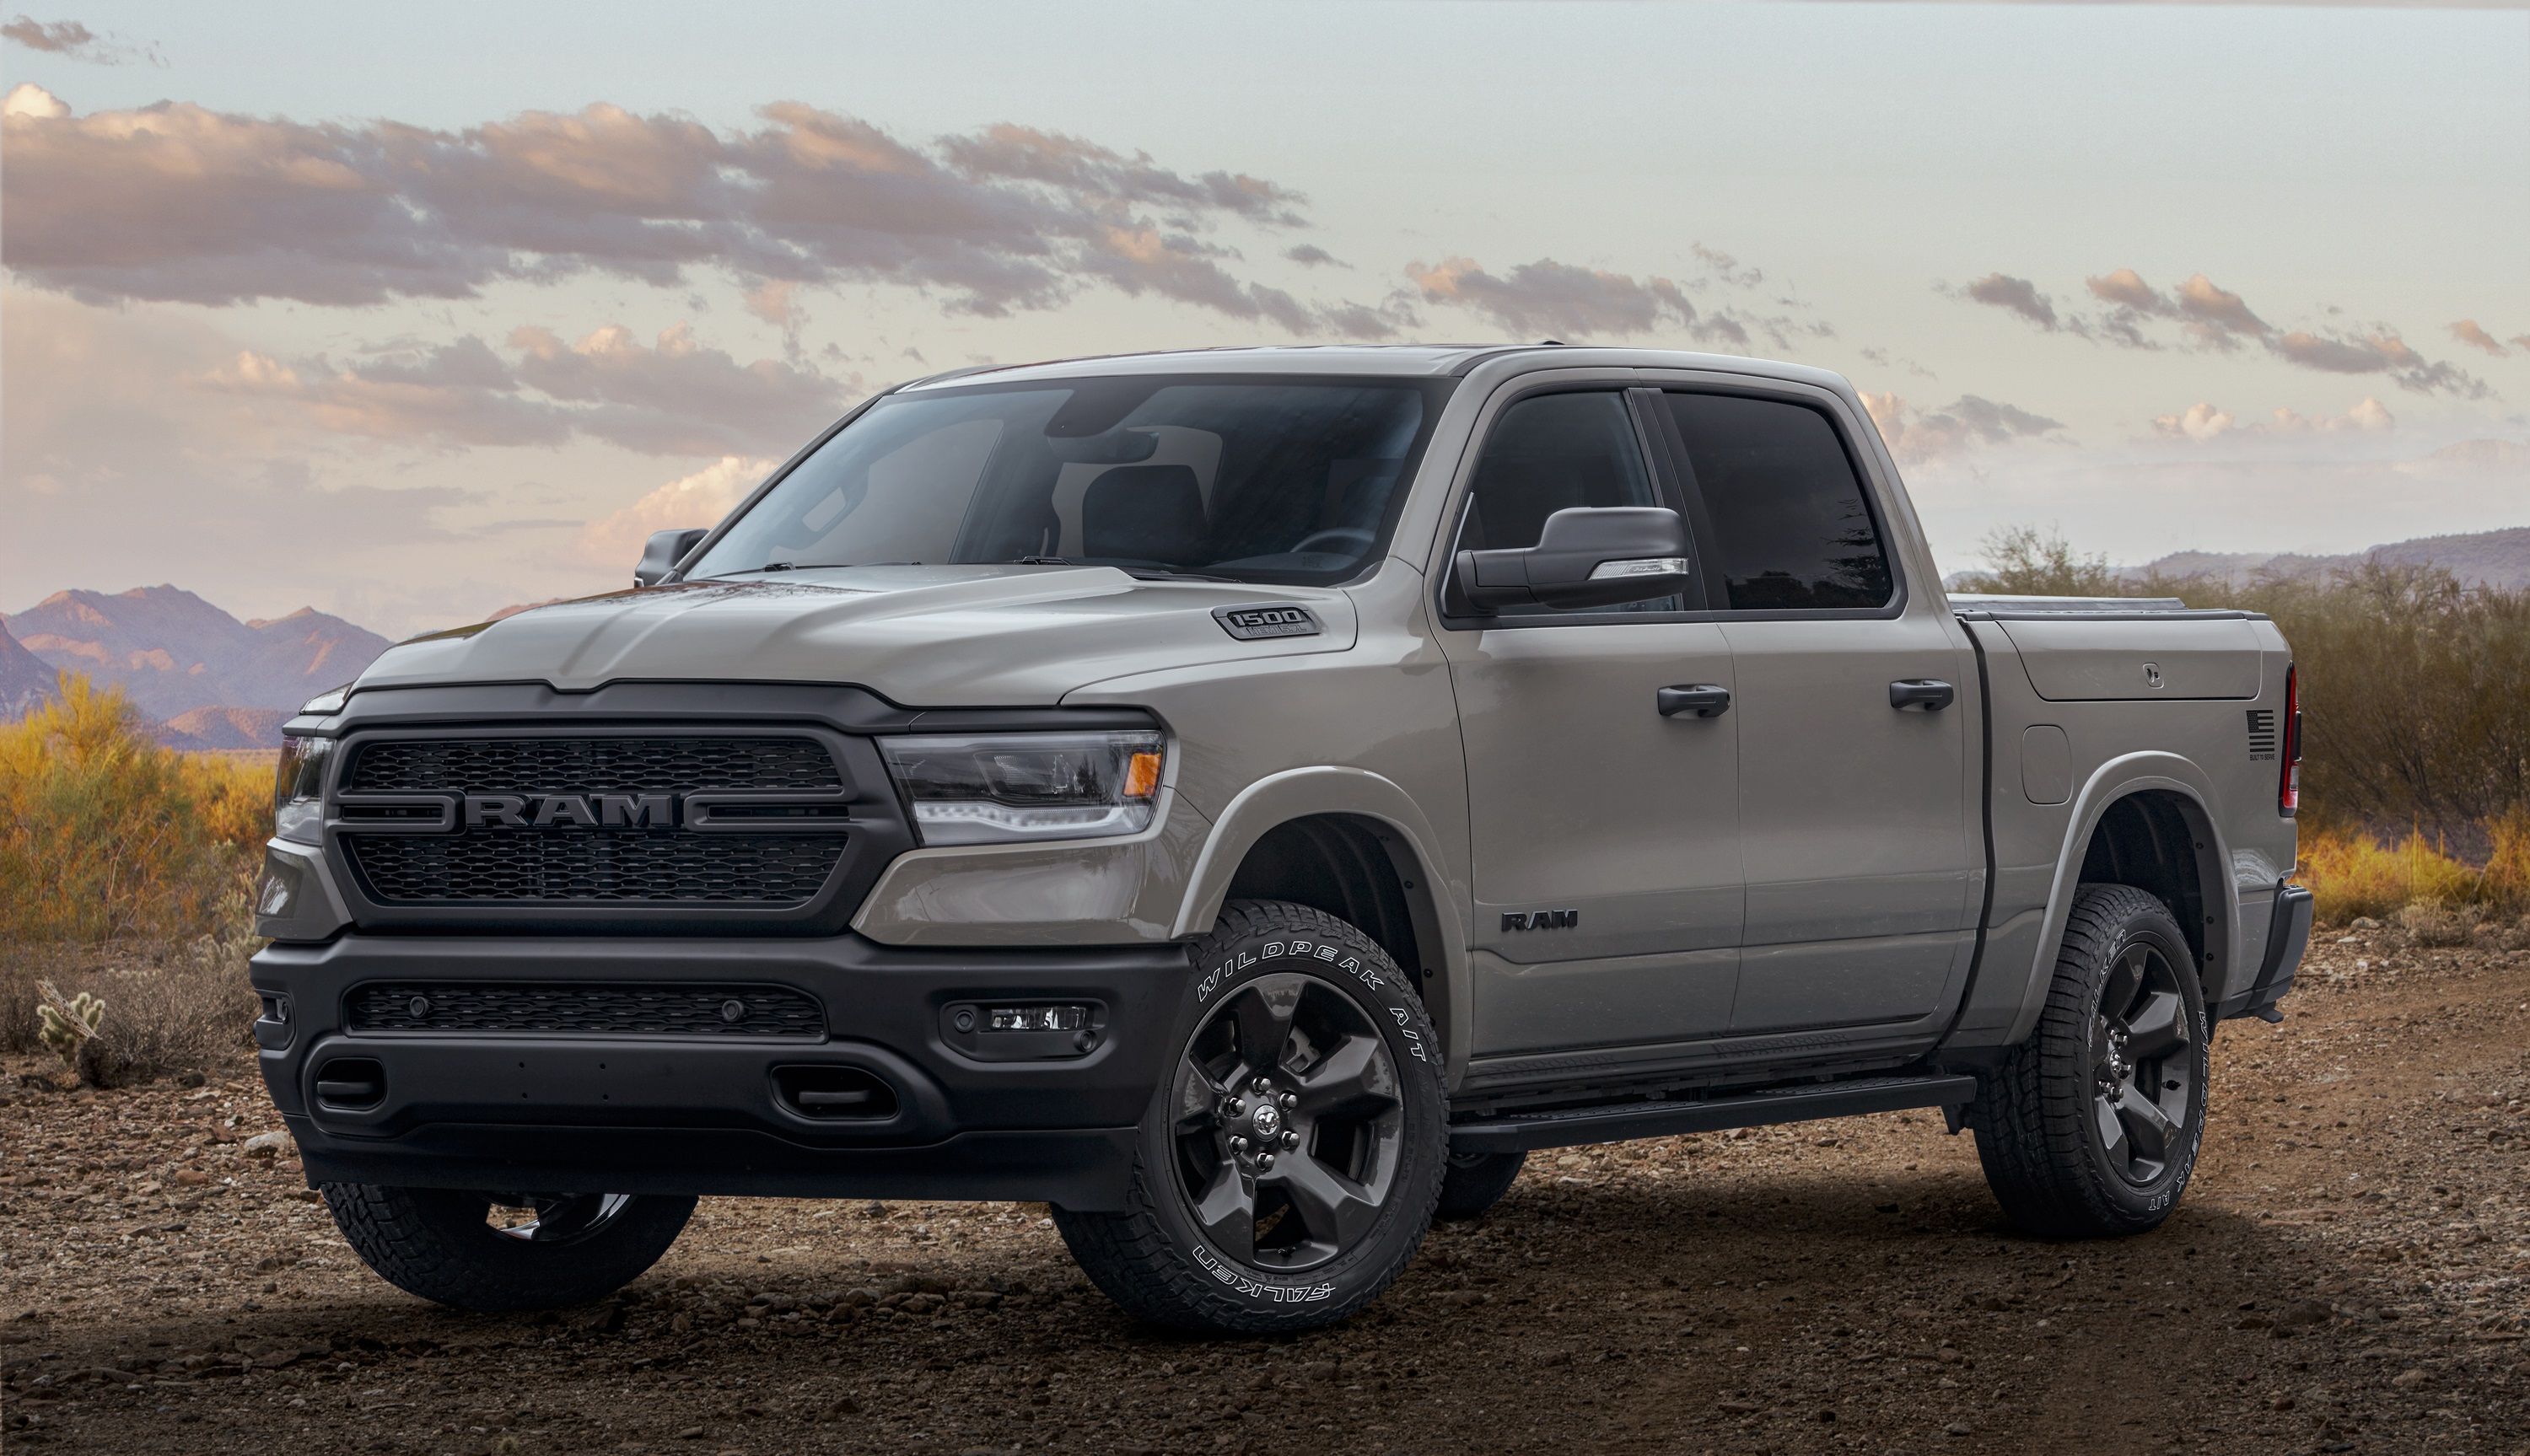 Ram to Serve Edition Honors the Five Branches of the U.S. Military